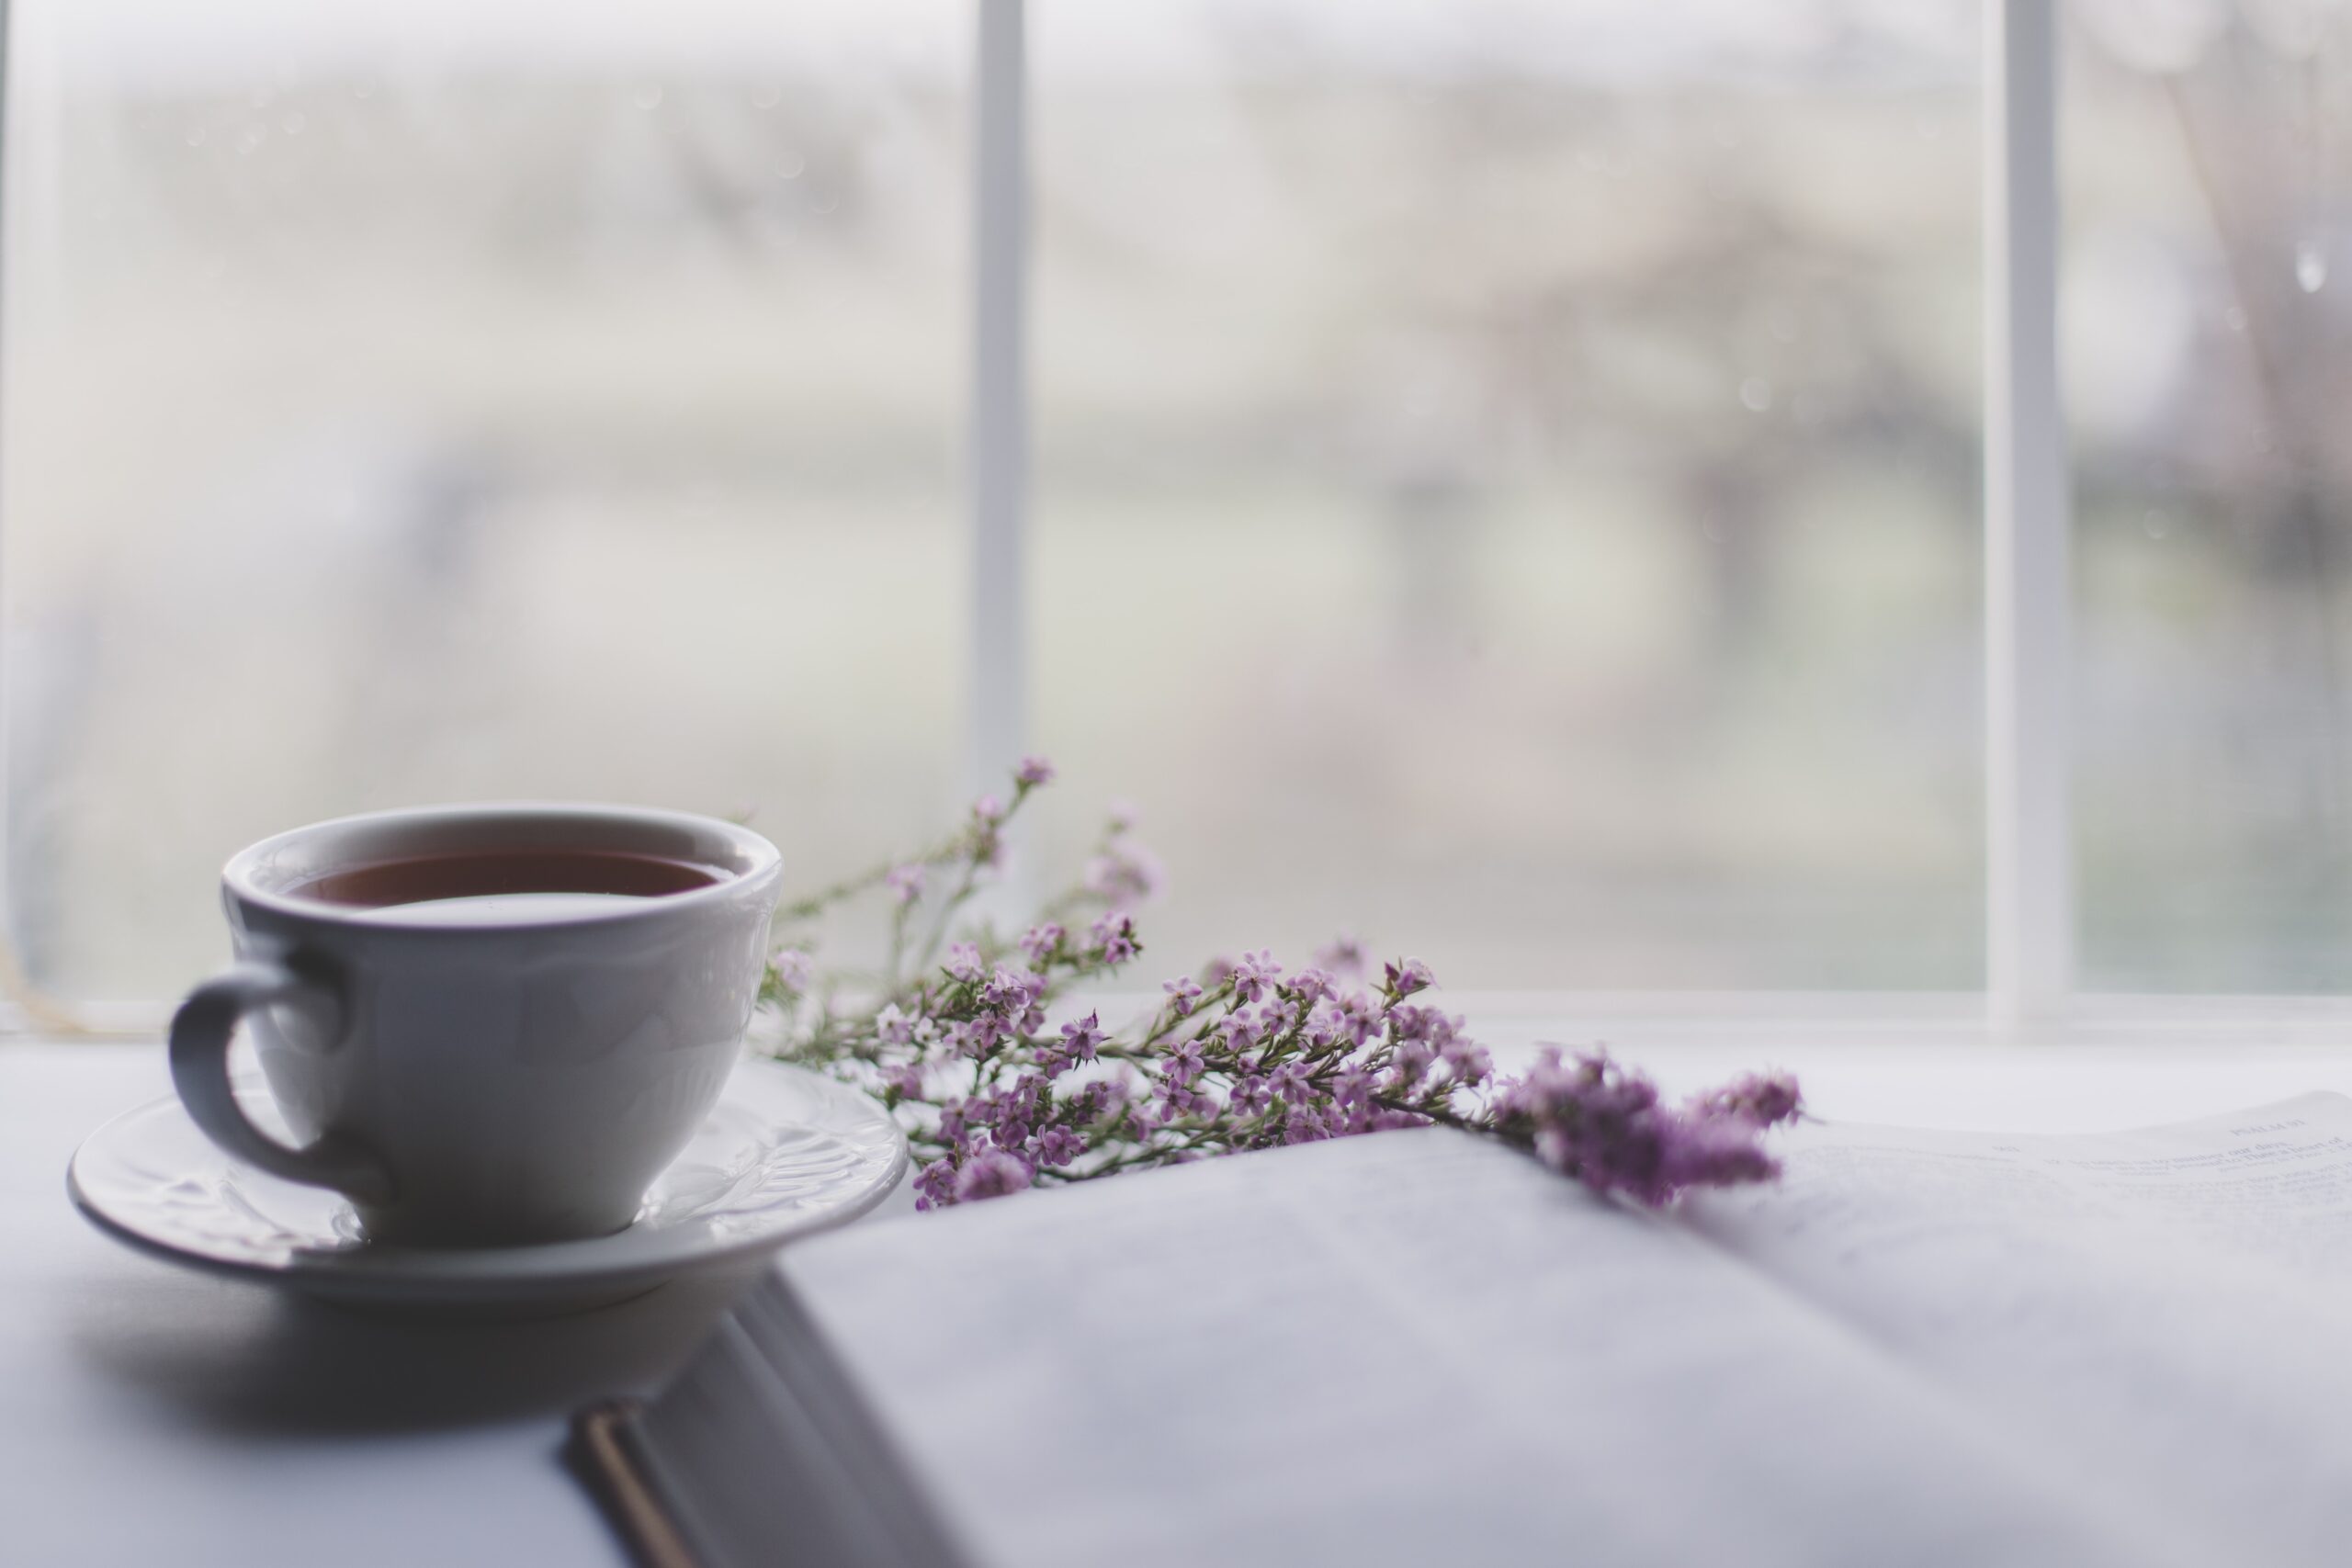 Photo of an open book near a window with a cup of tea